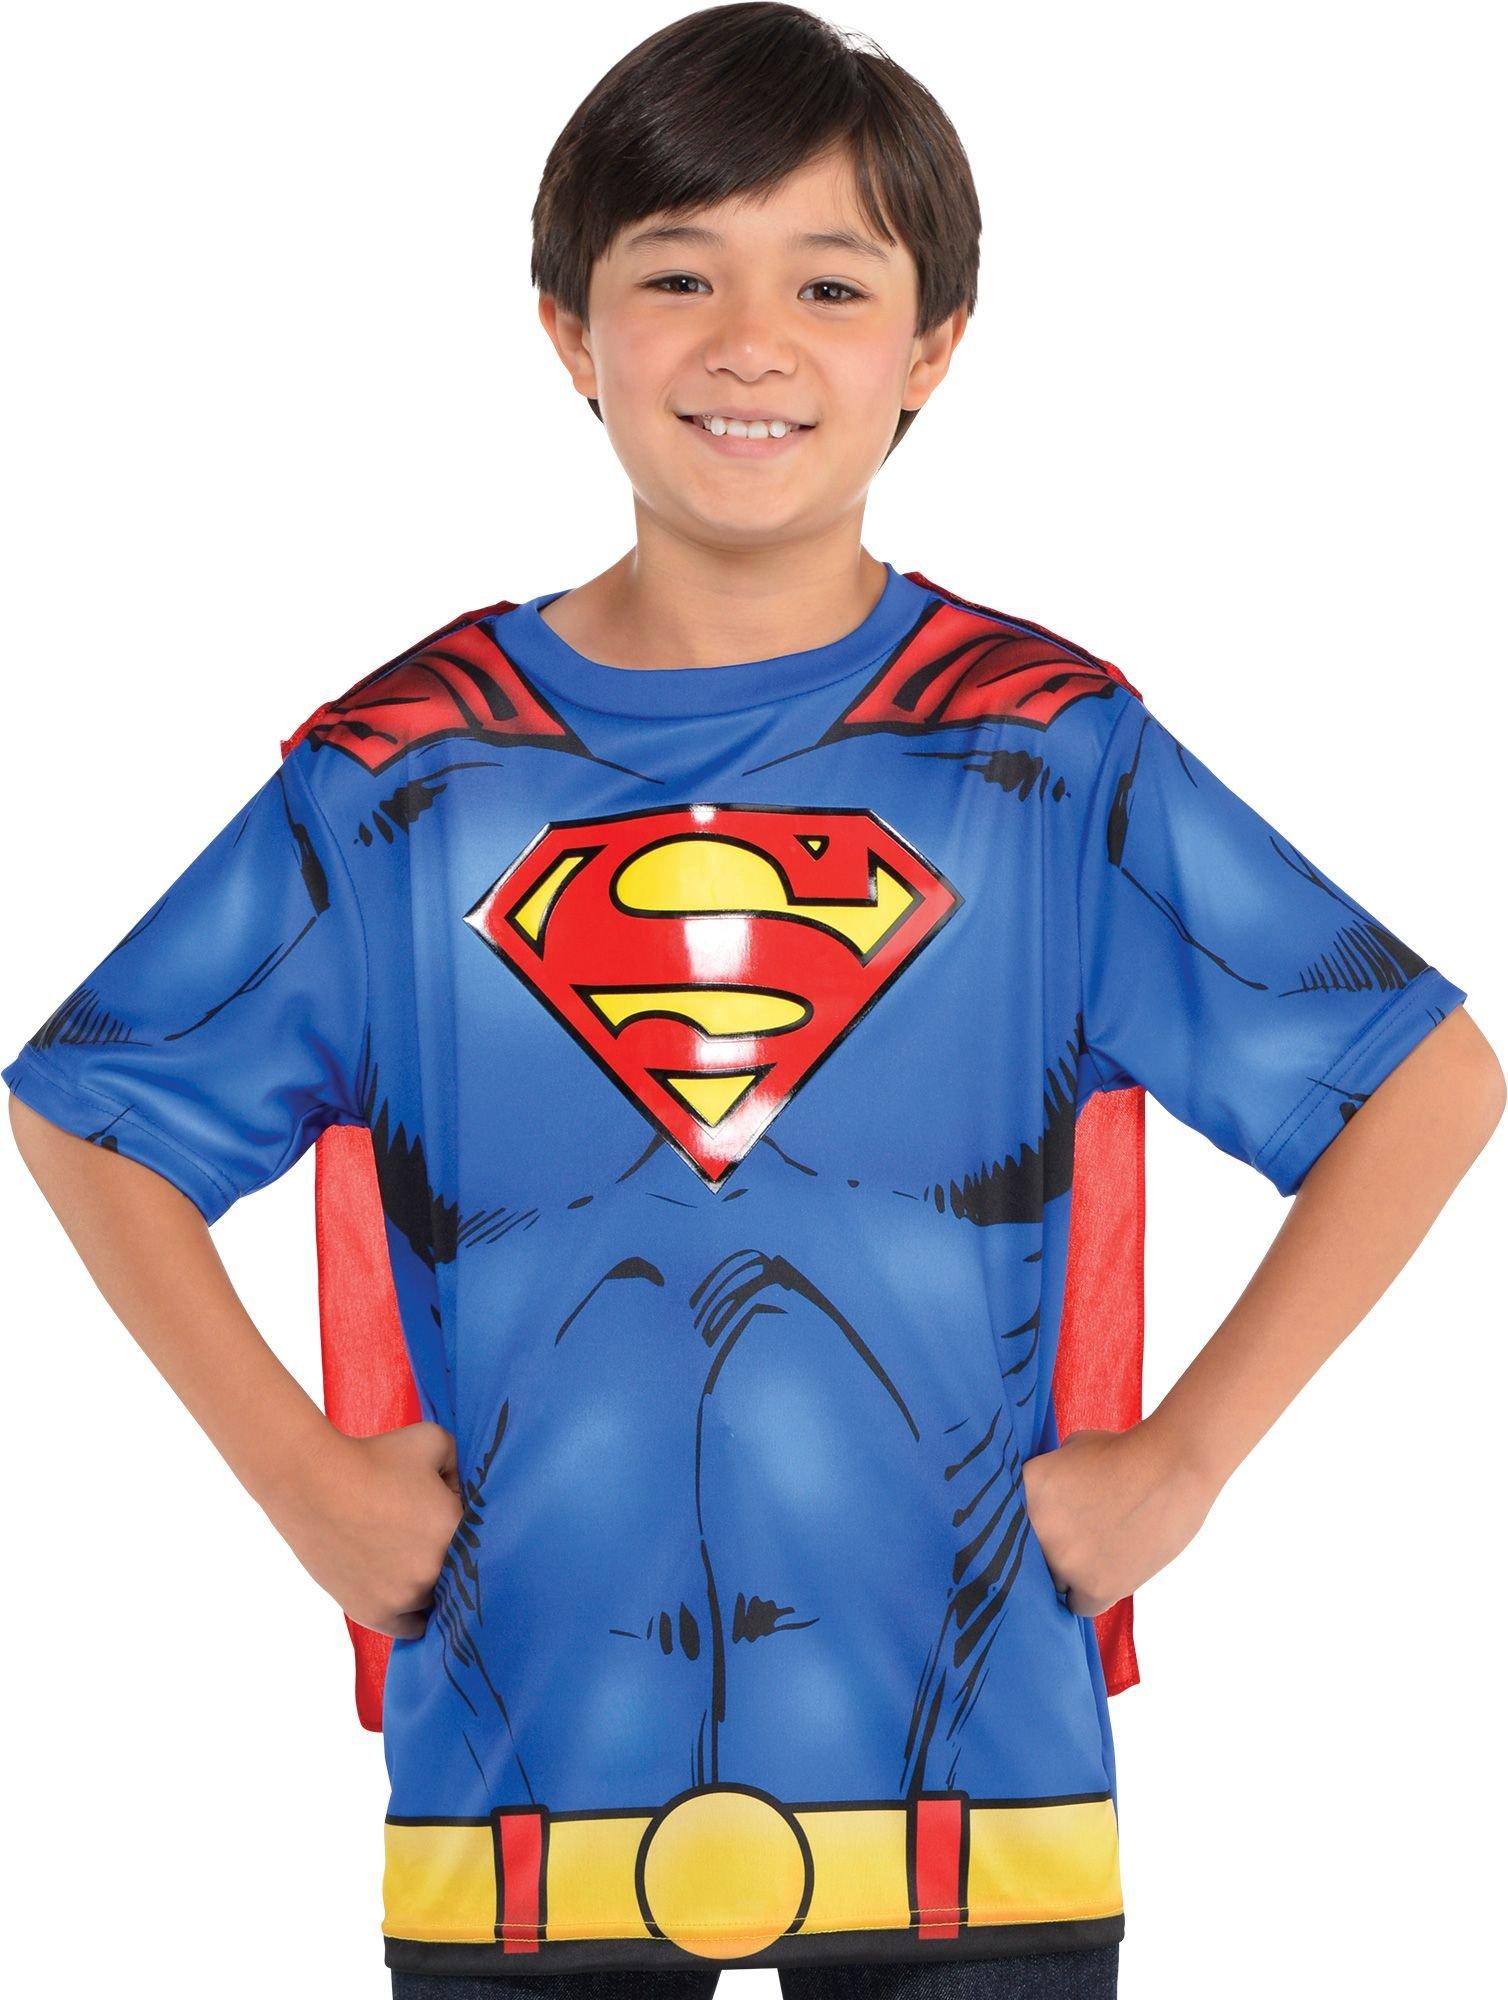 Adult Child Superman T-Shirt with Cape Size M Halloween Costume Male